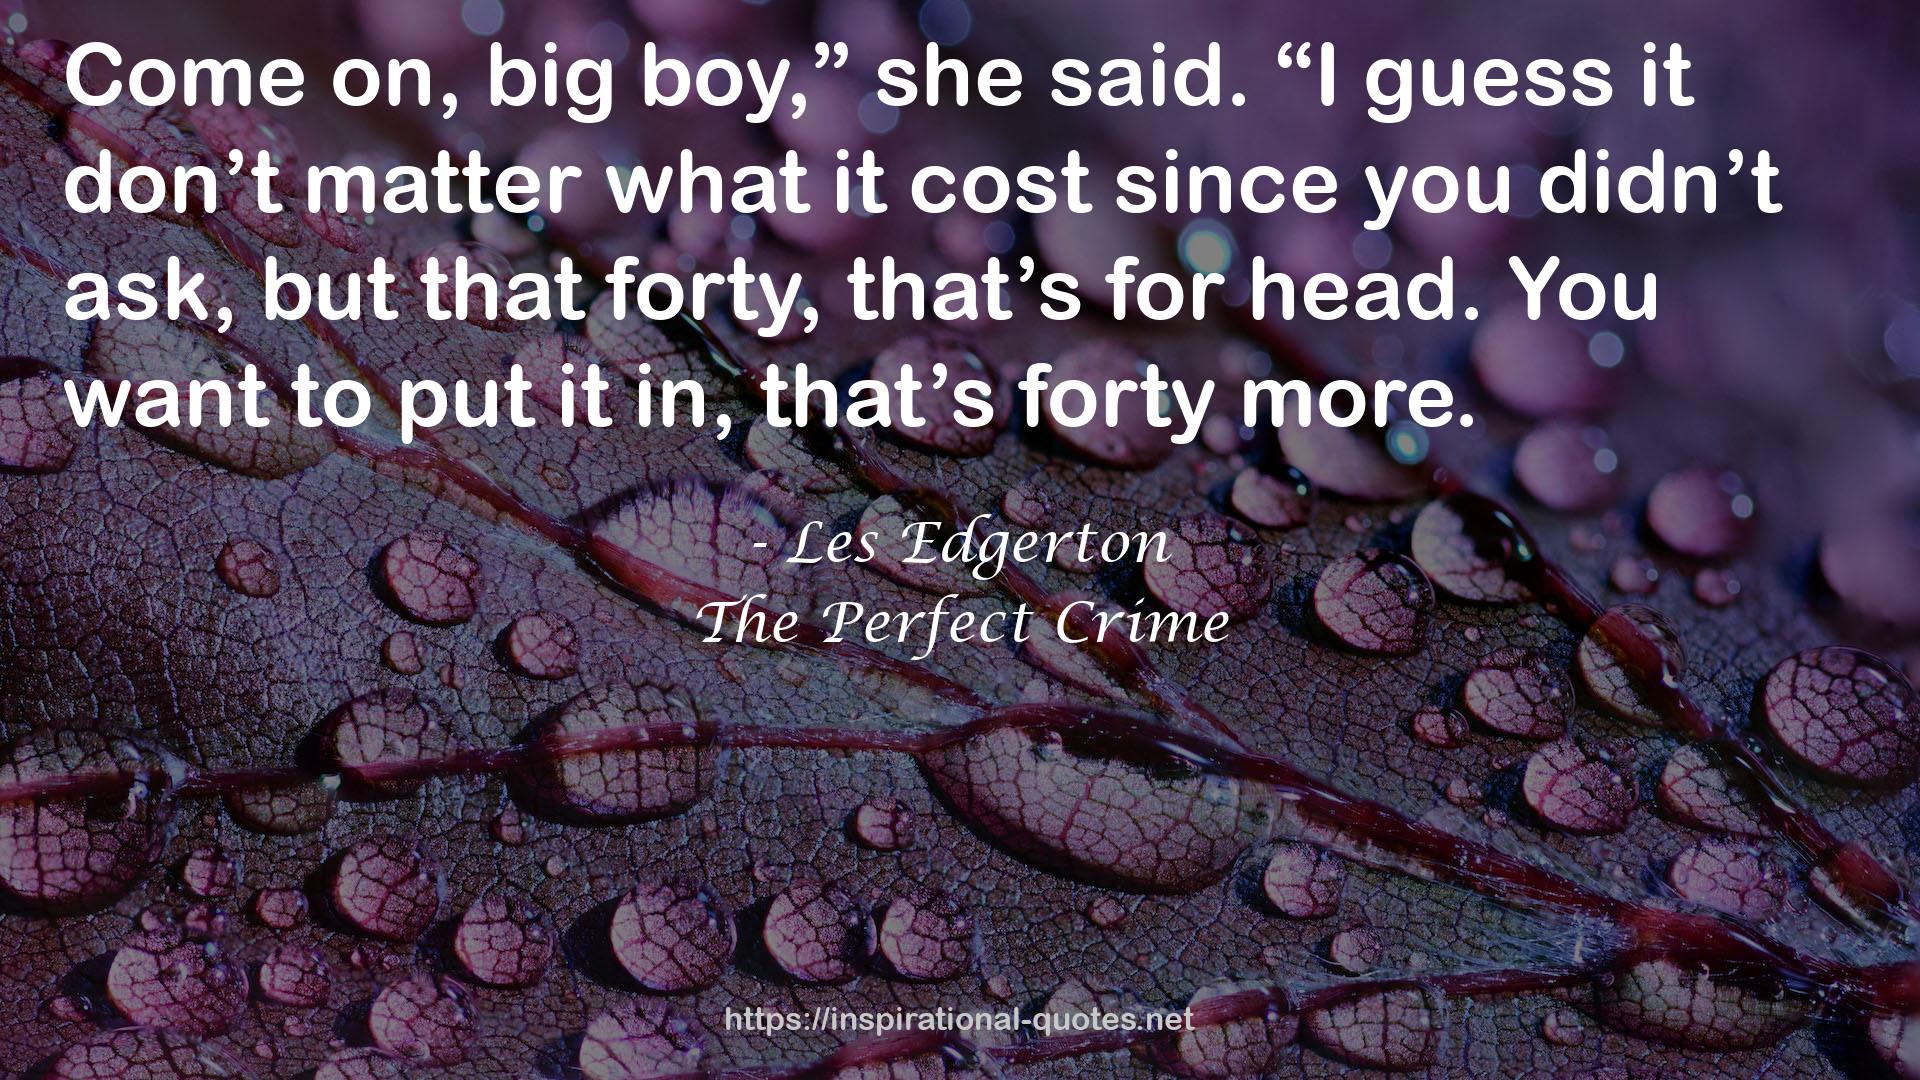 The Perfect Crime QUOTES